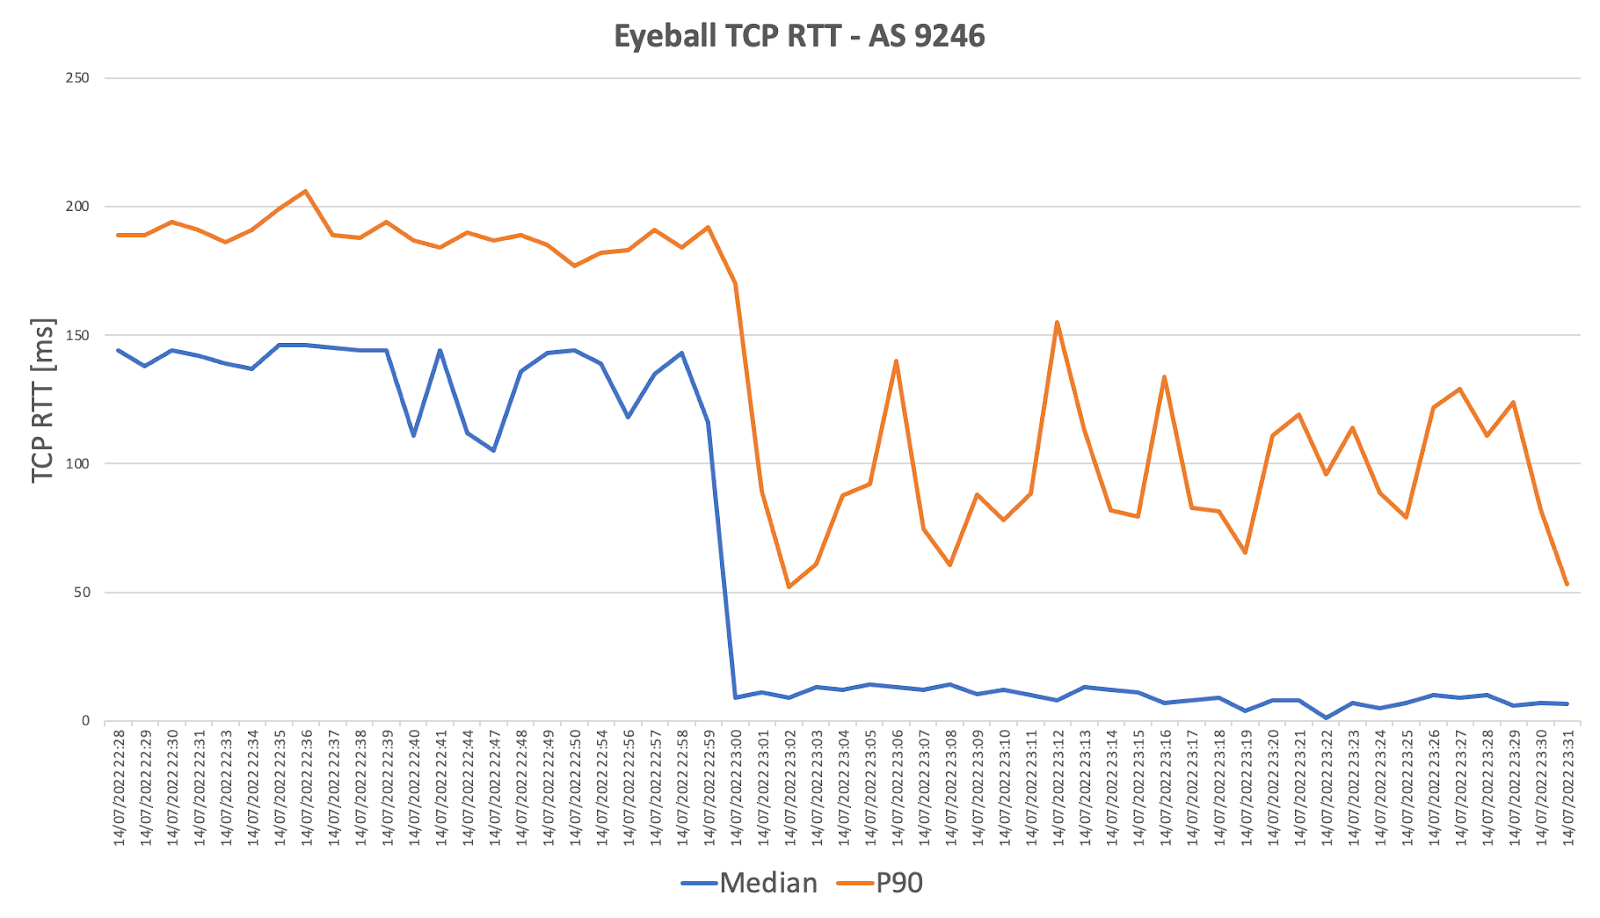 Figure 4: Eyeball TCP RTT for AS 9246 Before vs After Cloudflare Deployment at Guam.